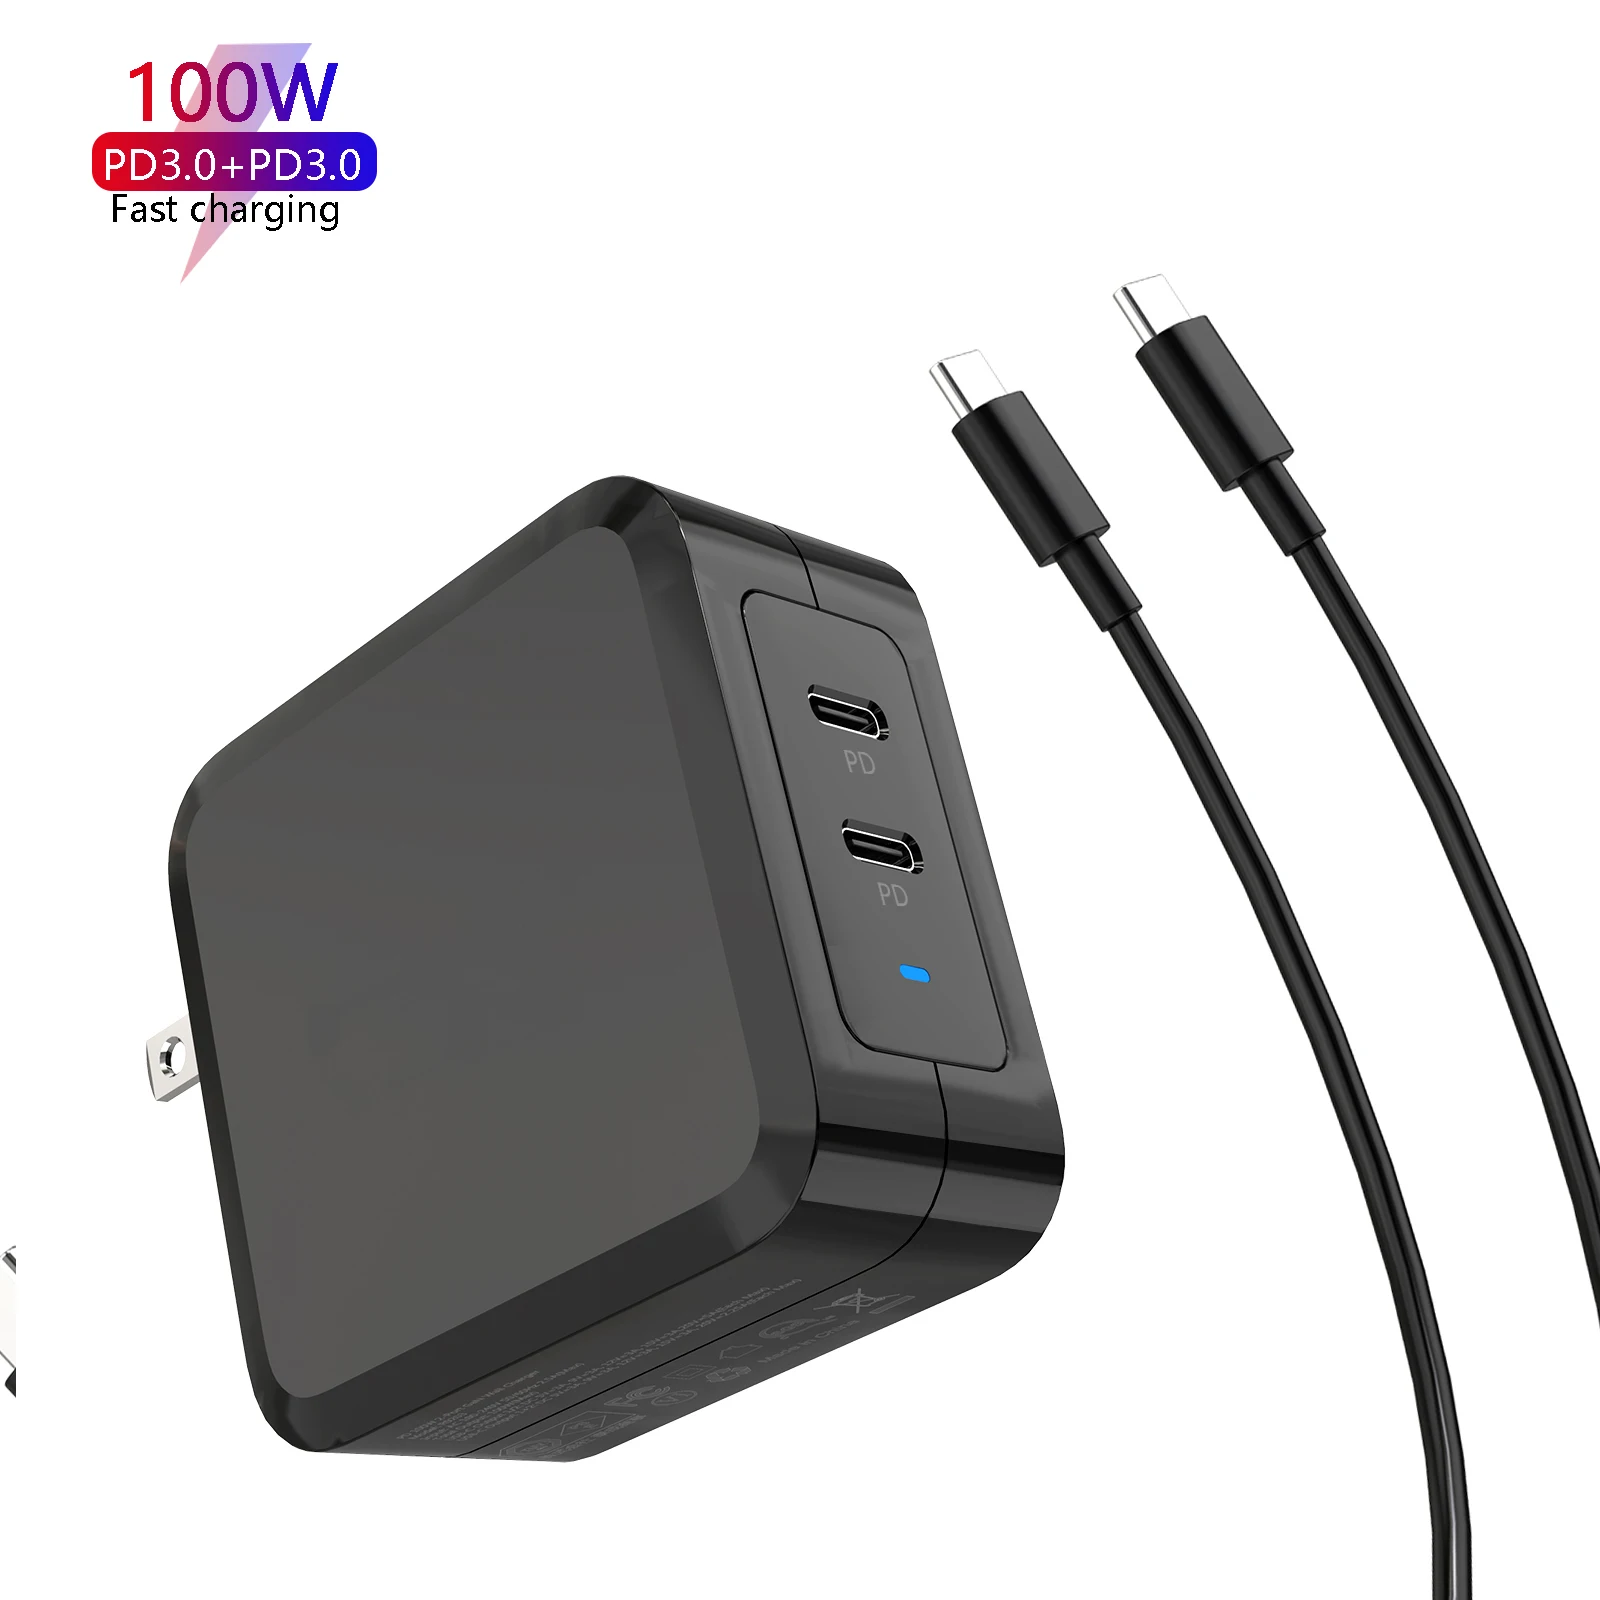 

JMTO US UK PD 100W 2C Gallium Nitride GaN Fast Charging 100 watt 2 Ports wall Chargers for Macbook Laptop Adapter Charge